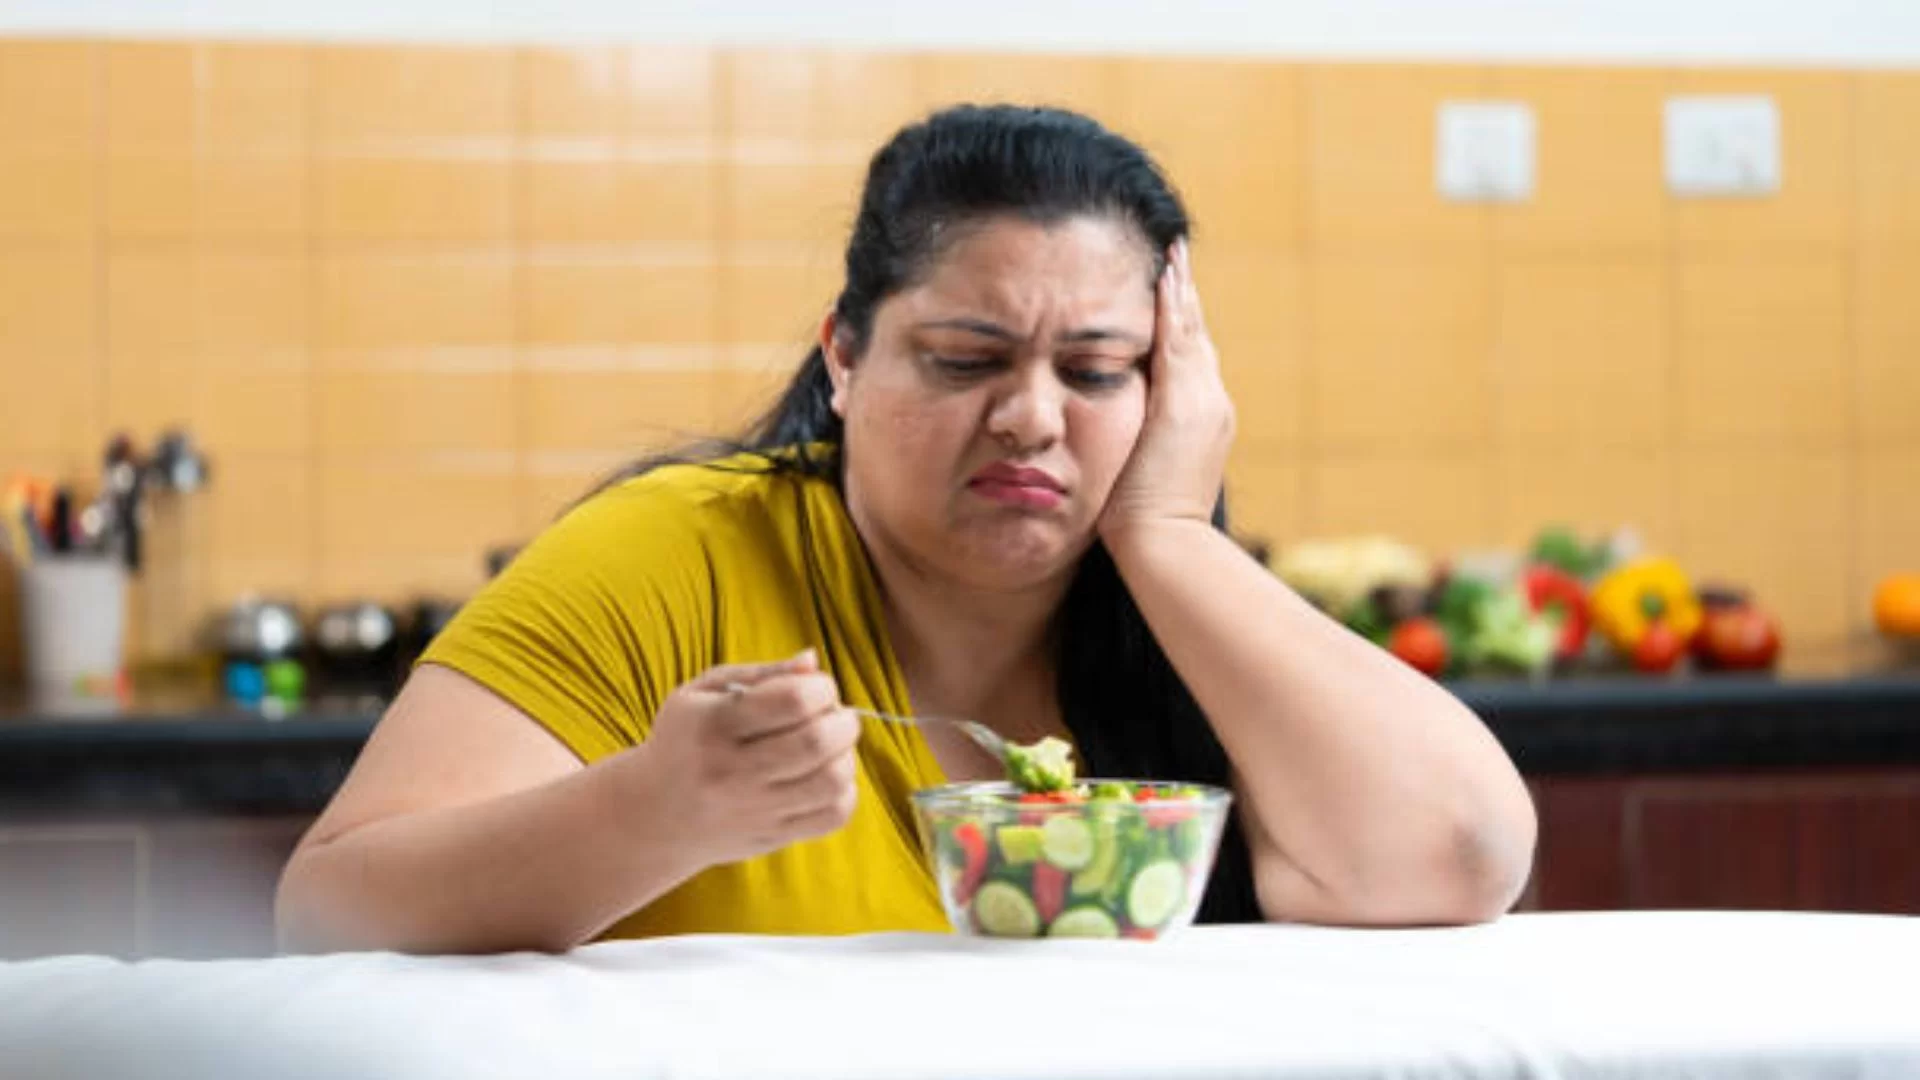 Overweight Woman Eating Salad In A Kitchen